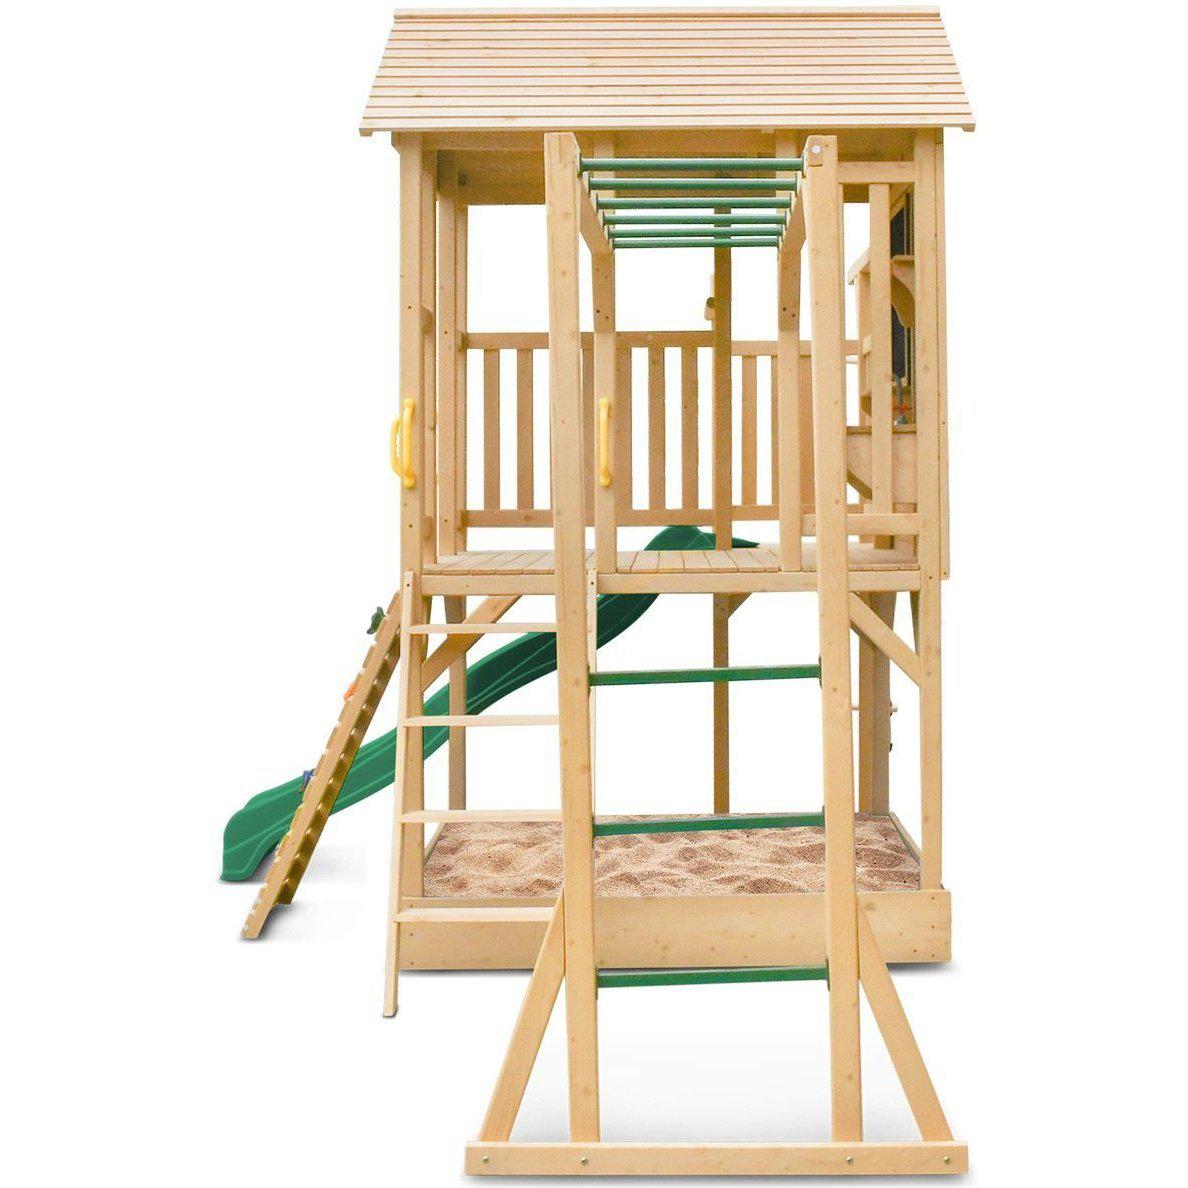 Kingston Cubby House with Green Slide: Perfect Outdoor Play - Buy